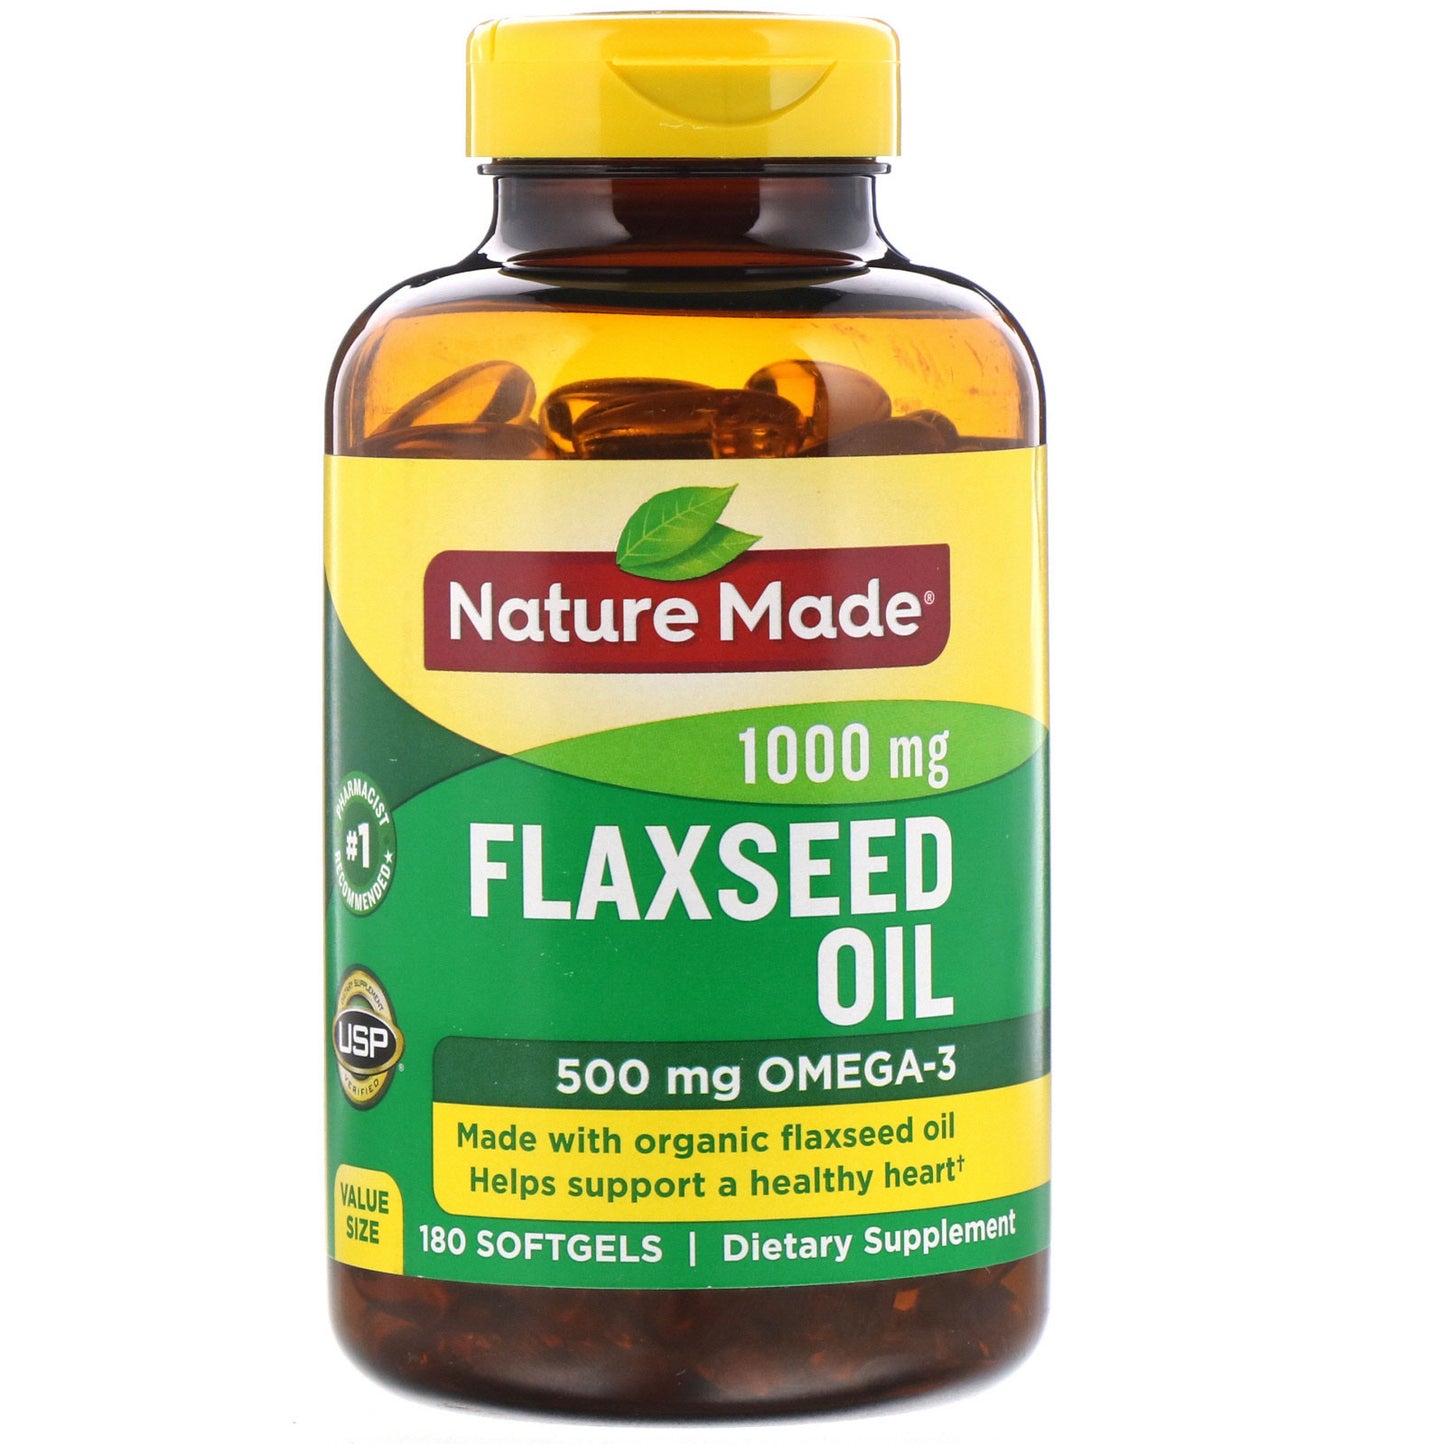 NATUREMADE FLAXSEED OIL, 100 SOFTGELS